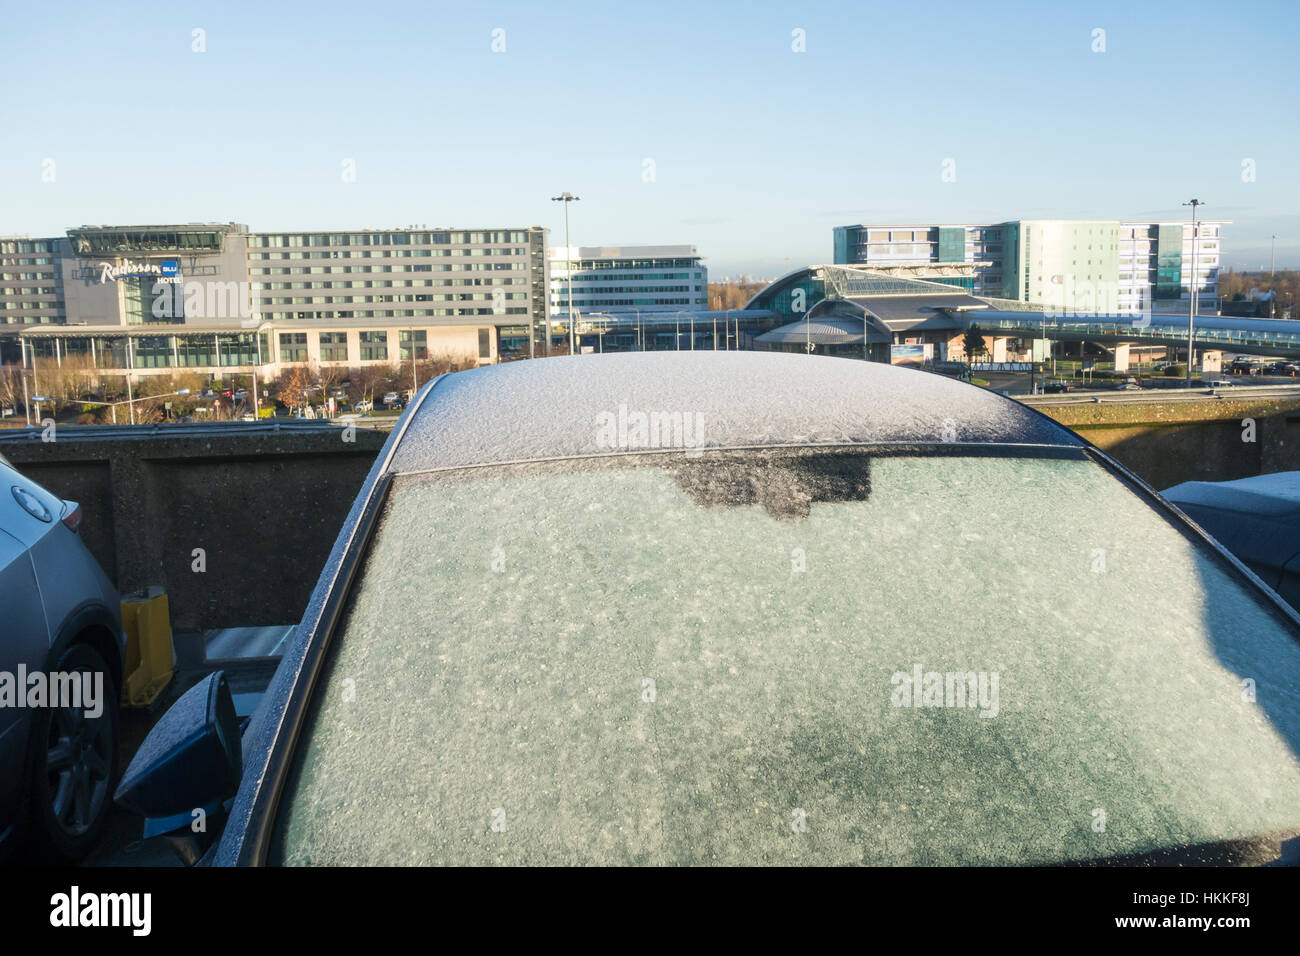 Manchester airport terminal 1 multi storey car park on a frosty morning. UK Stock Photo